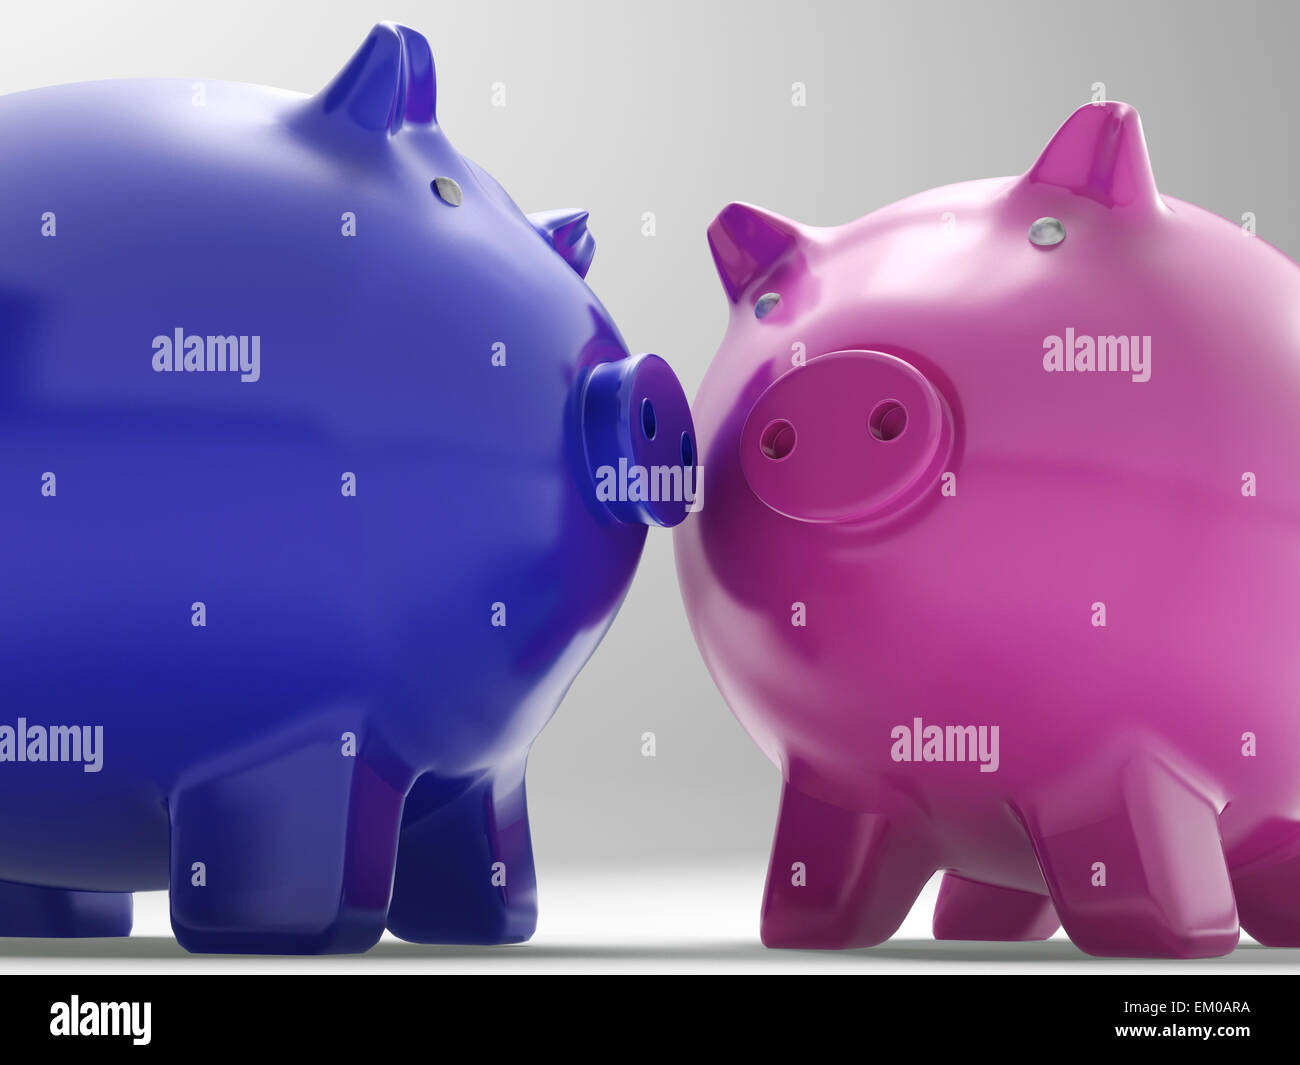 Pair Of Pigs Shows Exchange And Wealth Stock Photo